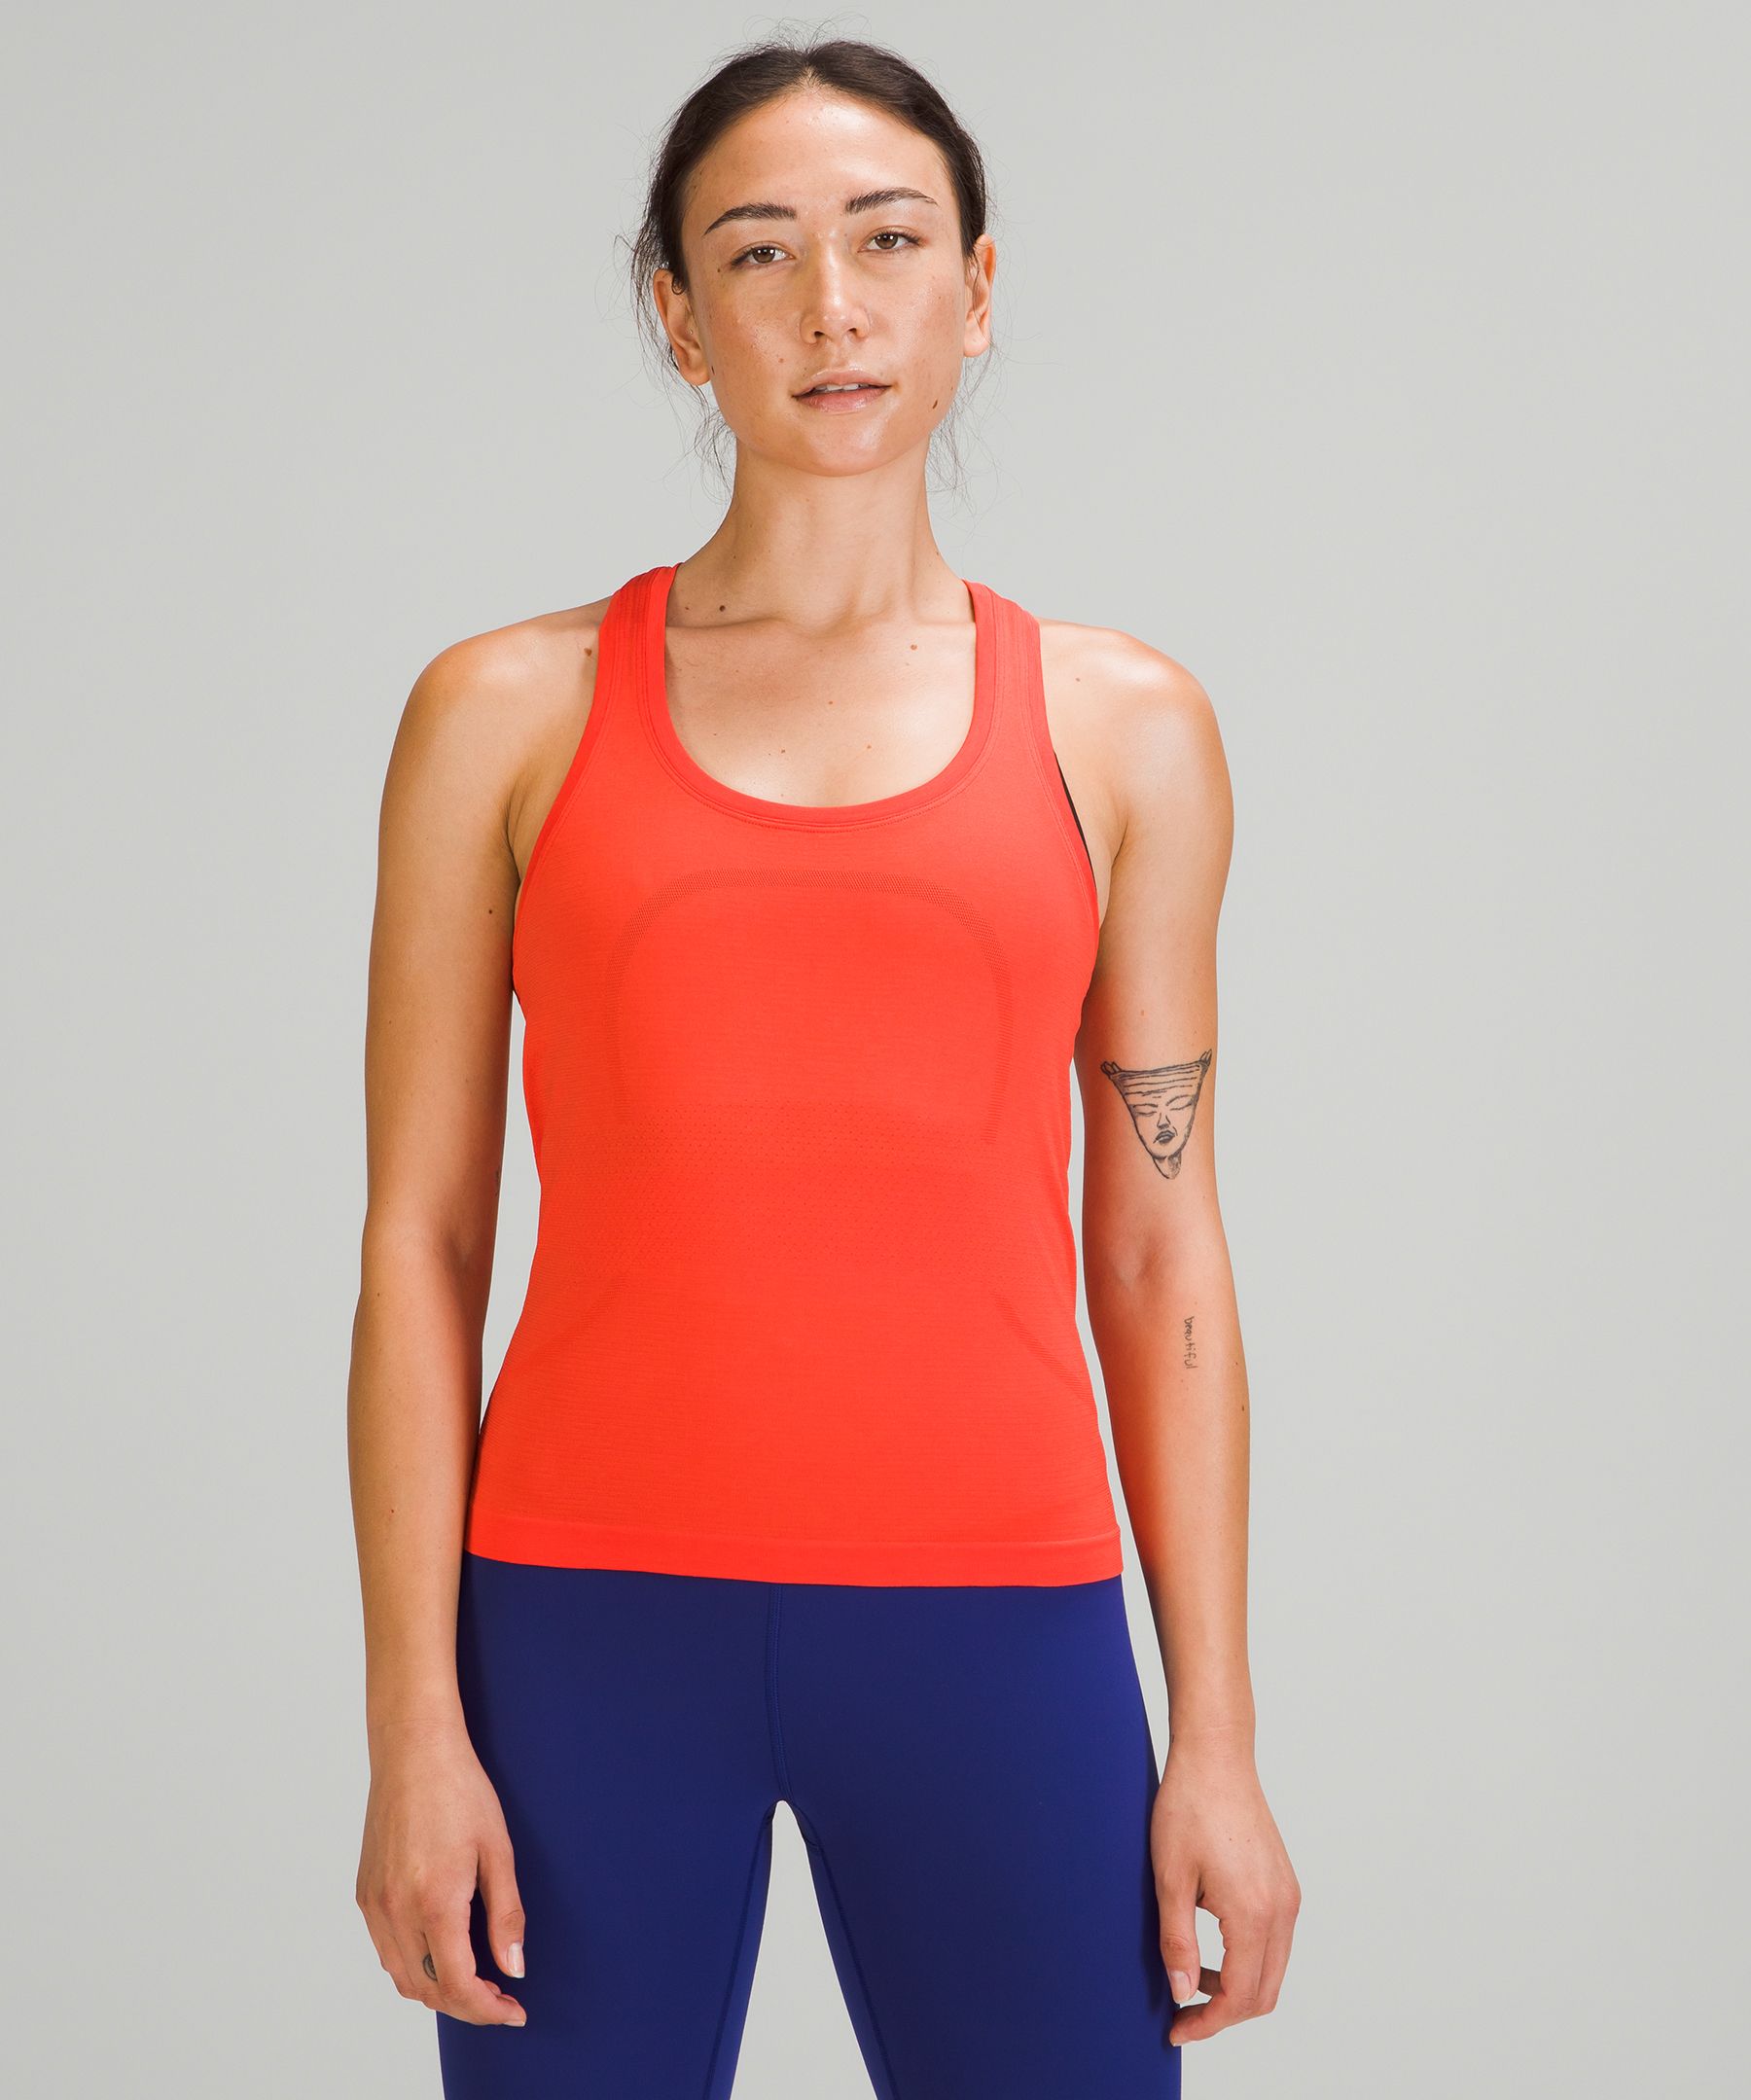 Lululemon Swiftly Tech Racerback Tank Top 2.0 Race Length In Autumn Red/autumn Red